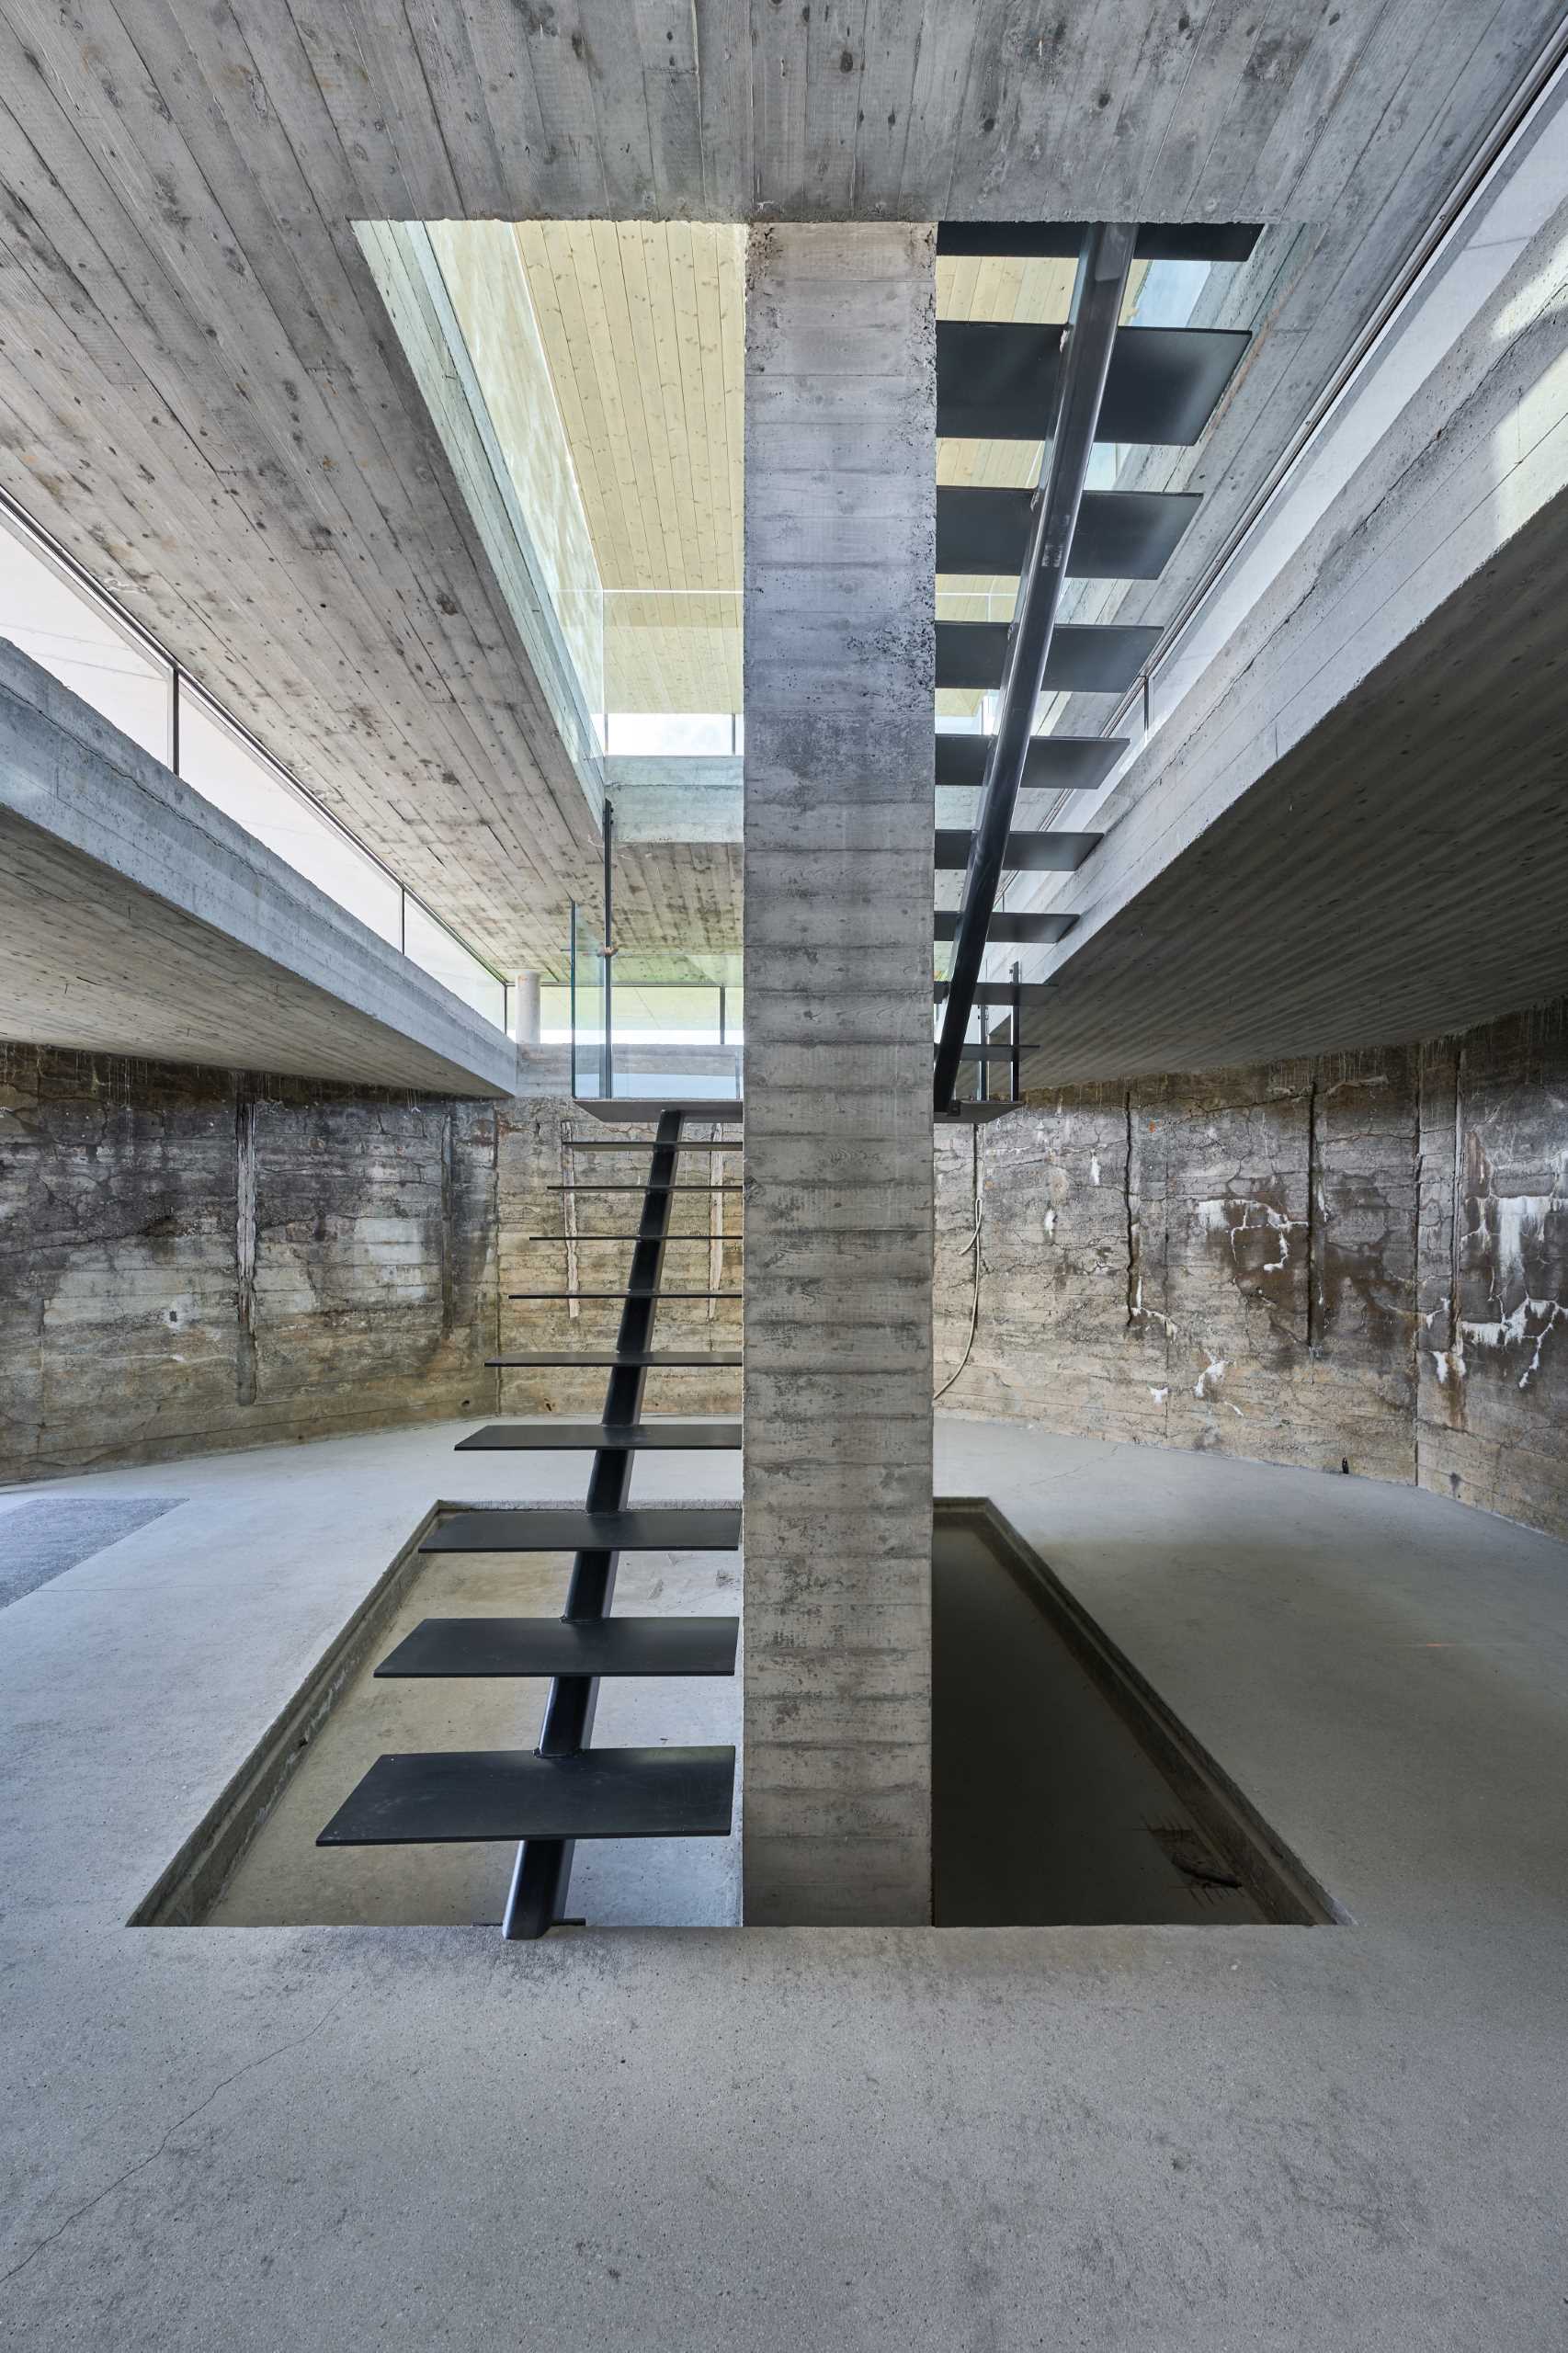 The stairs are put in as a central and sculptural element, leading from the closed parts of the bunker and up to the light of the event space.